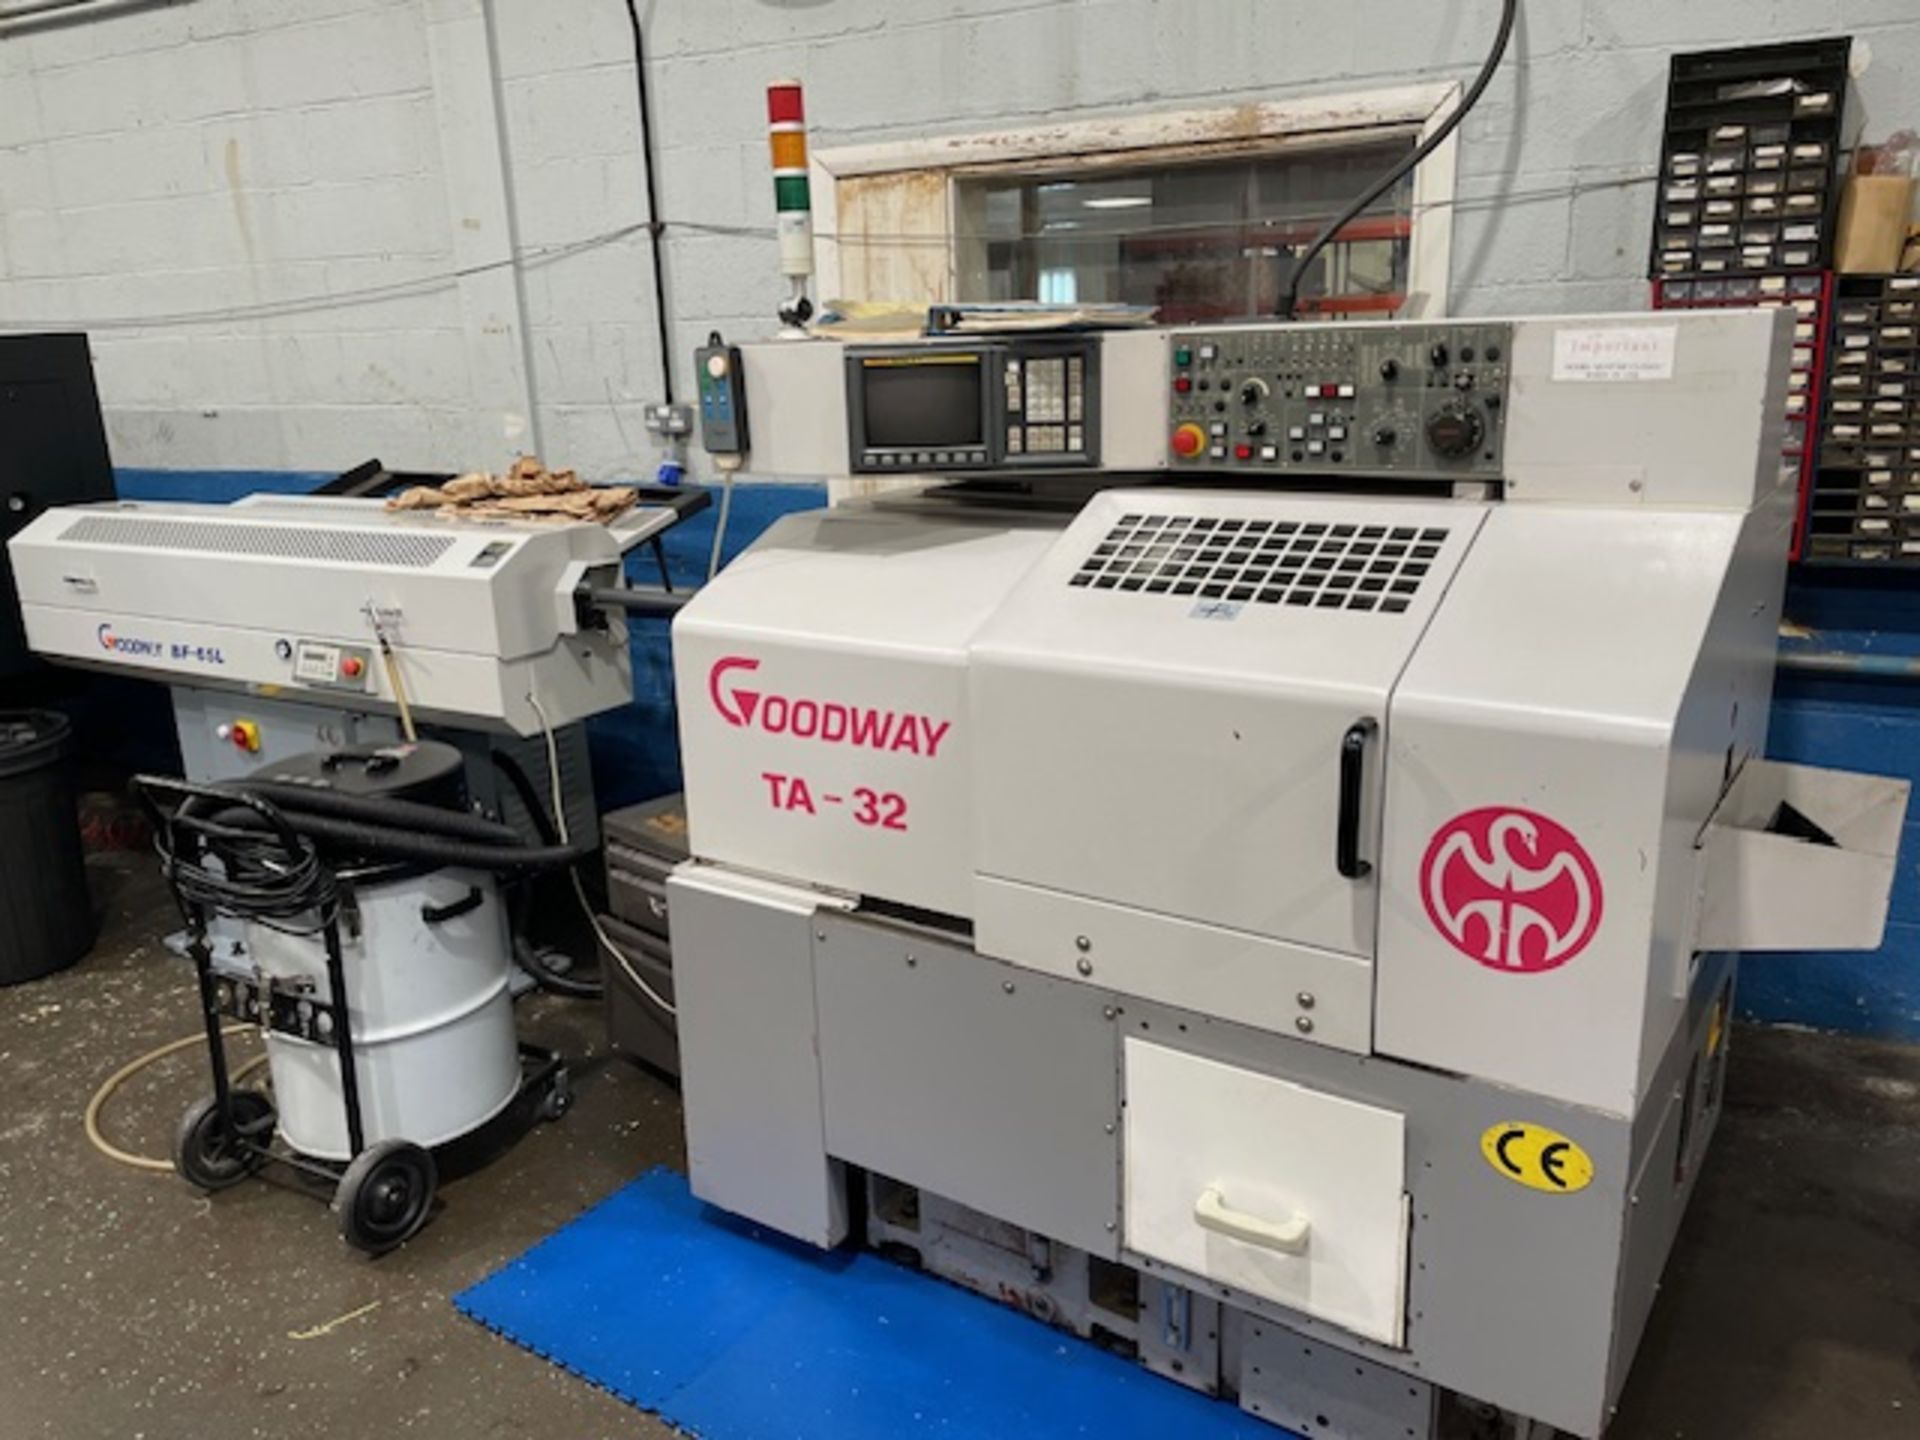 Goodway TA-32 CNC Lathe (2002) Serial Number 81692 with Goodway BF-654 Bar Feed (Location: Earls